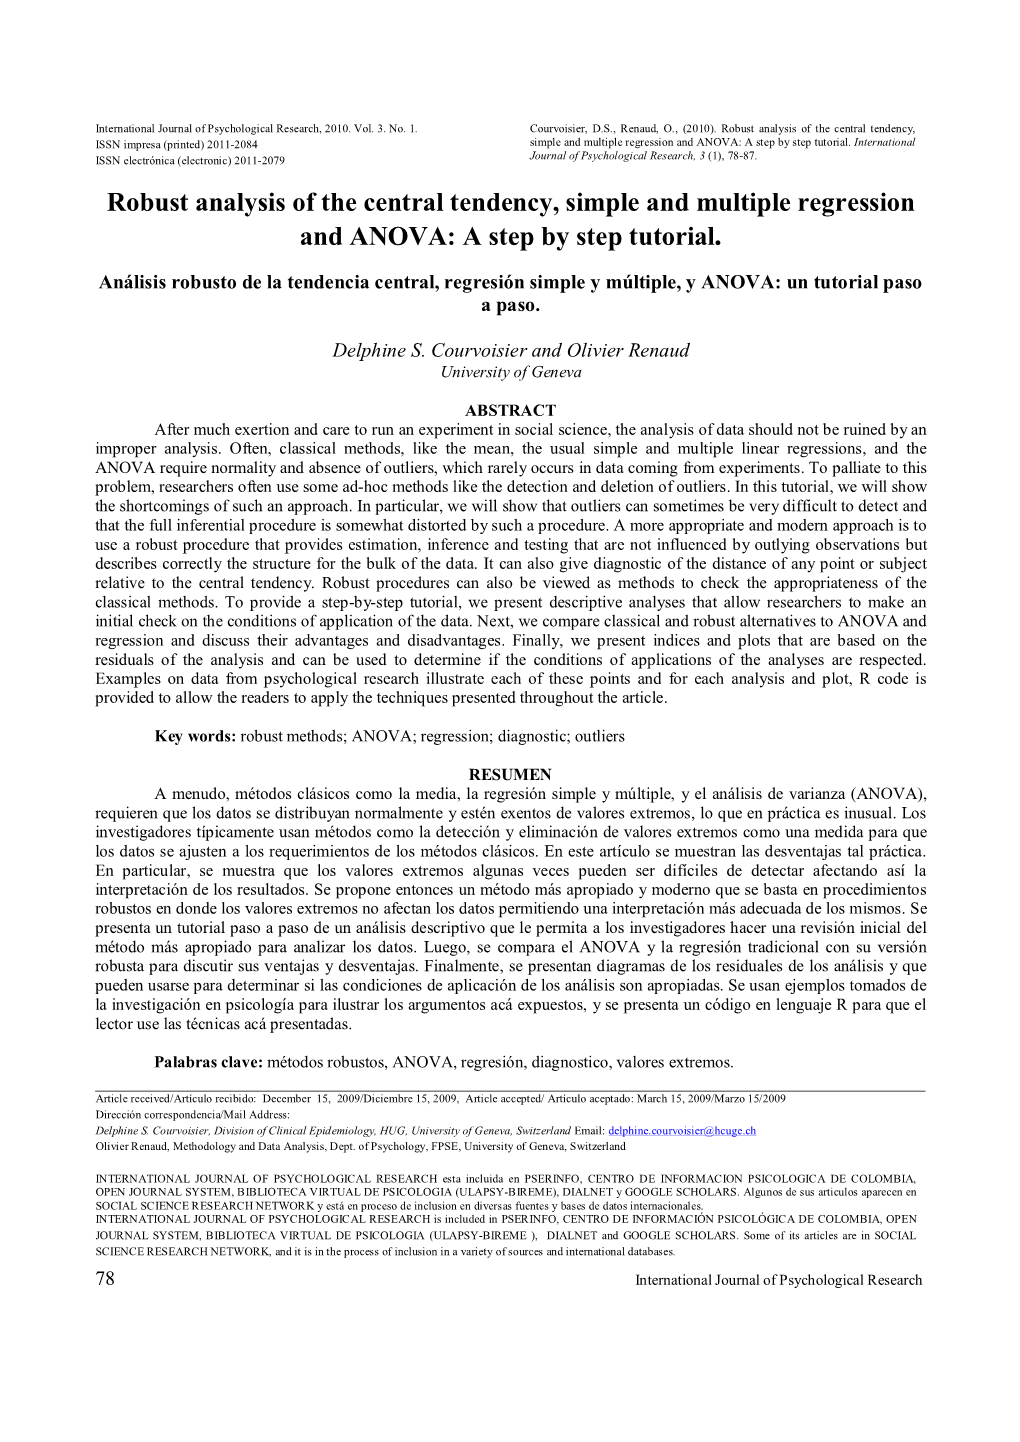 Robust Analysis of the Central Tendency, ISSN Impresa (Printed) 2011-2084 Simple and Multiple Regression and ANOVA: a Step by Step Tutorial